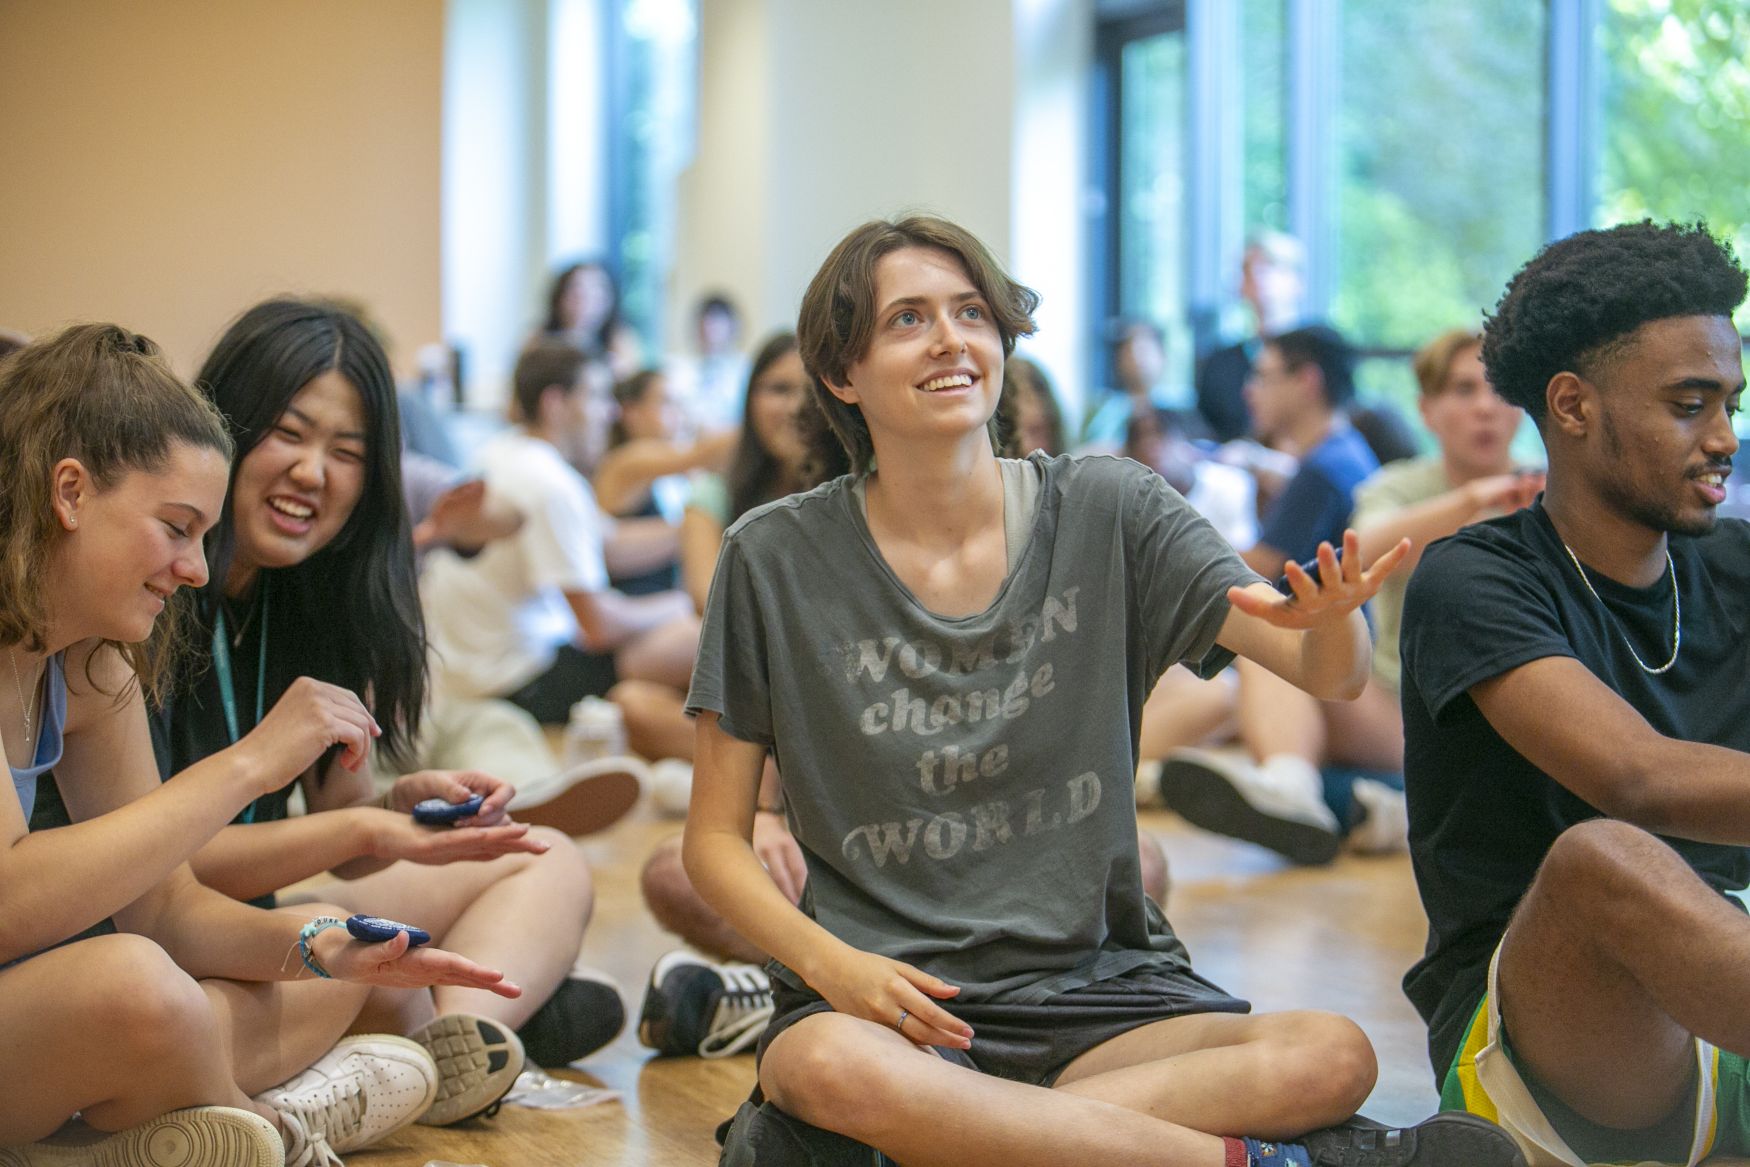 Meehan doing a bean bag exercise holding one hand up with the bag on the back of her hand surrounded by first-years sitting on the floor